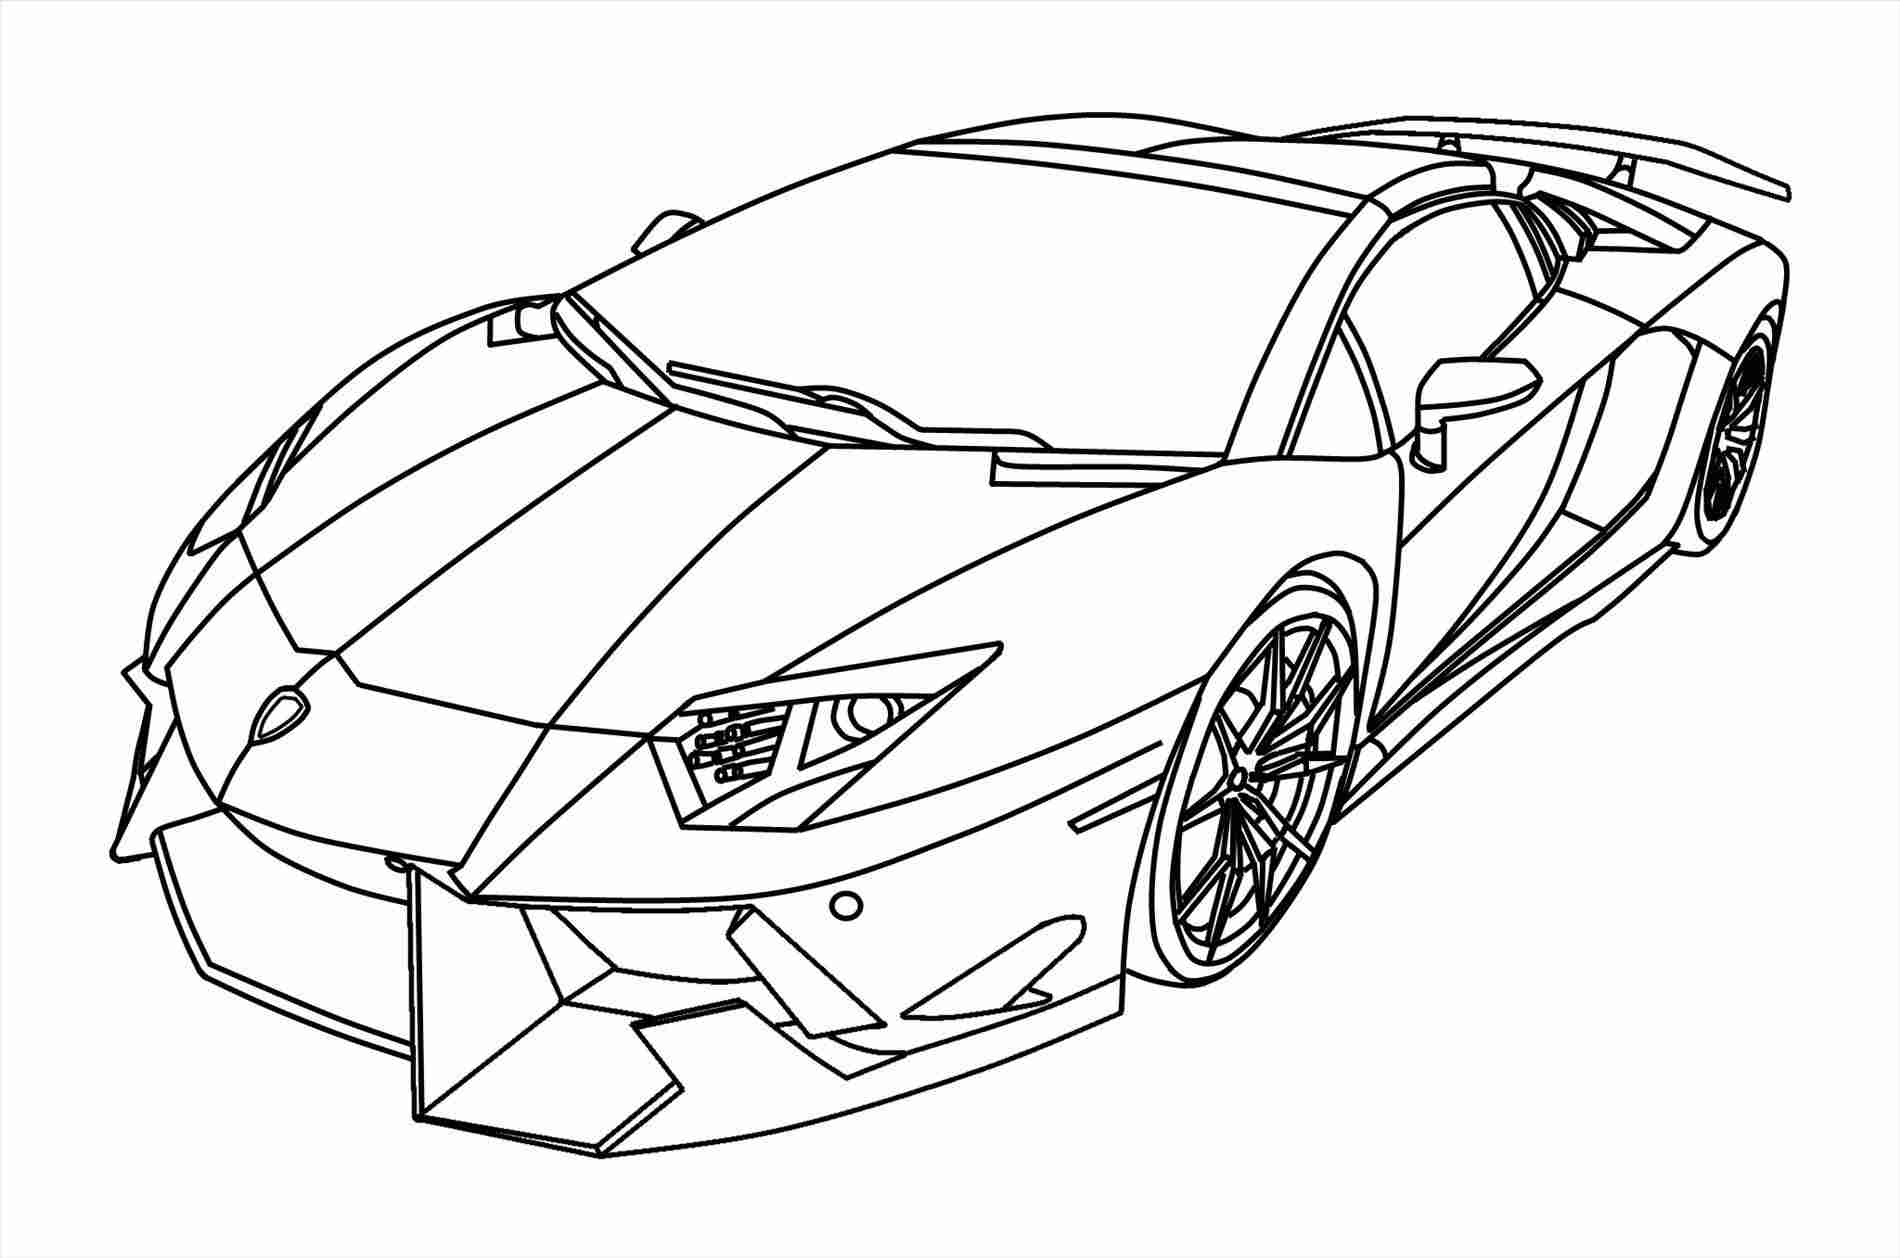 Lamborghini Sketch Step By Step at PaintingValley.com ...